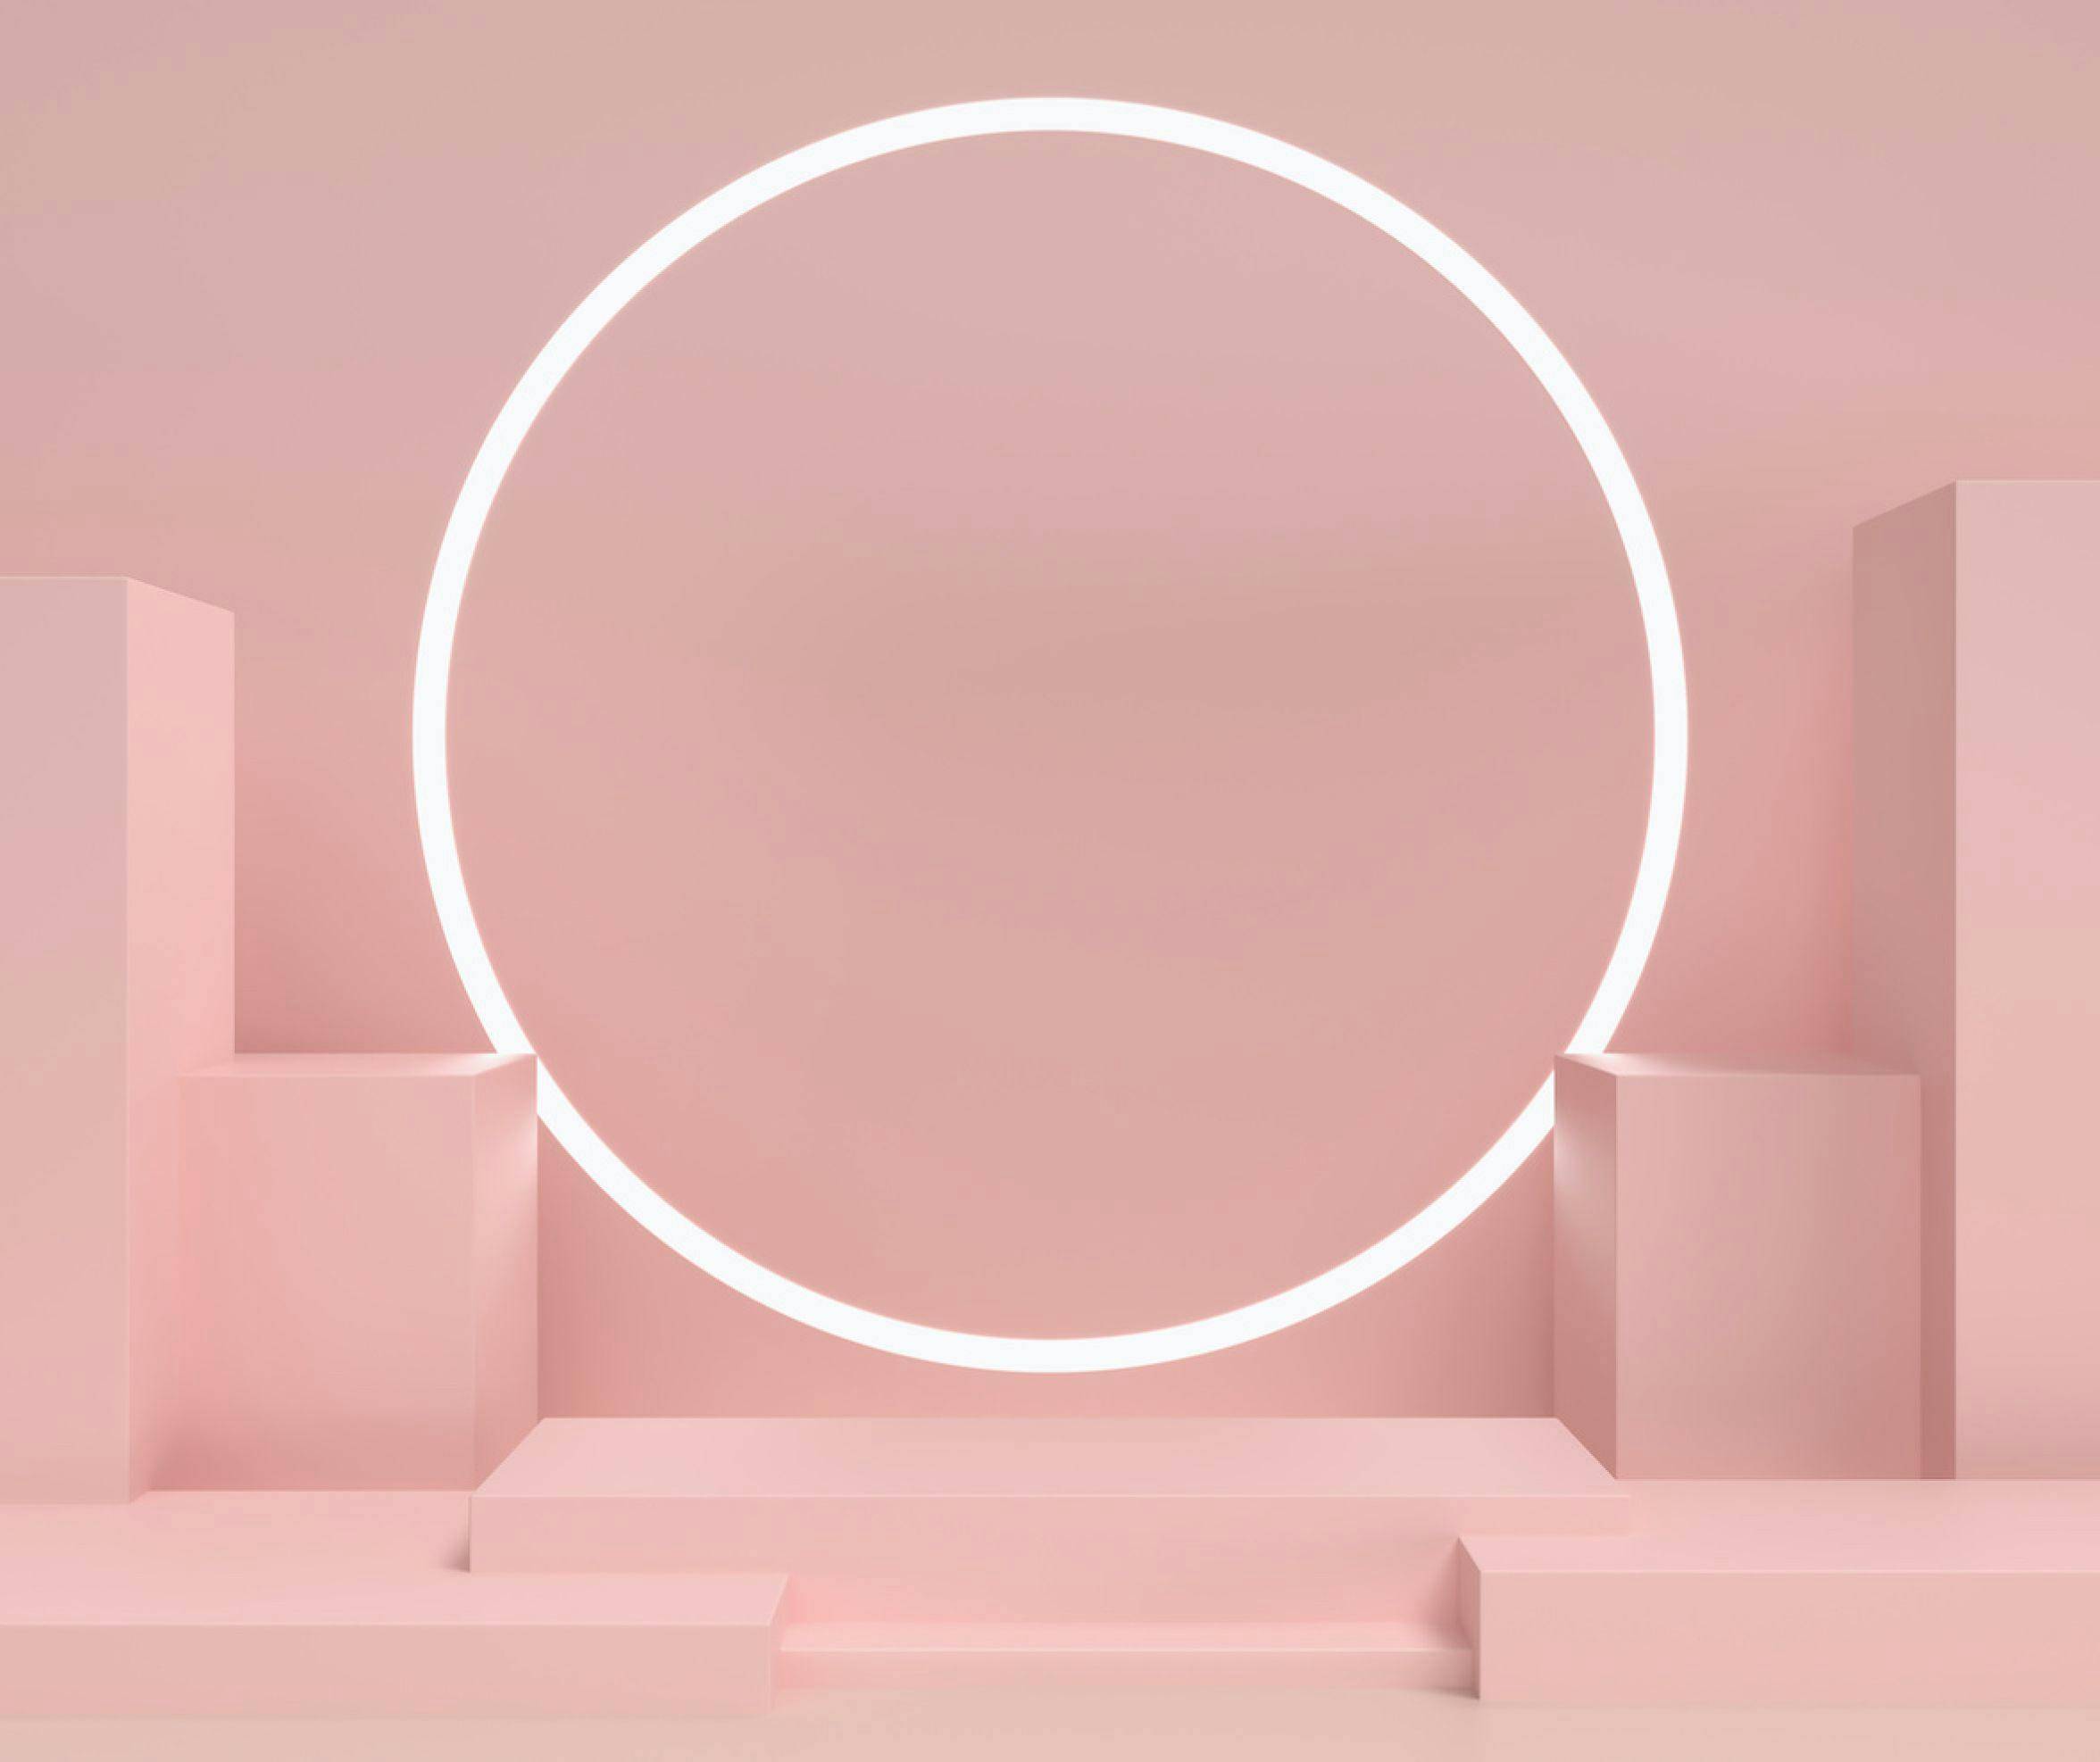 glowing circle on abstract pink background